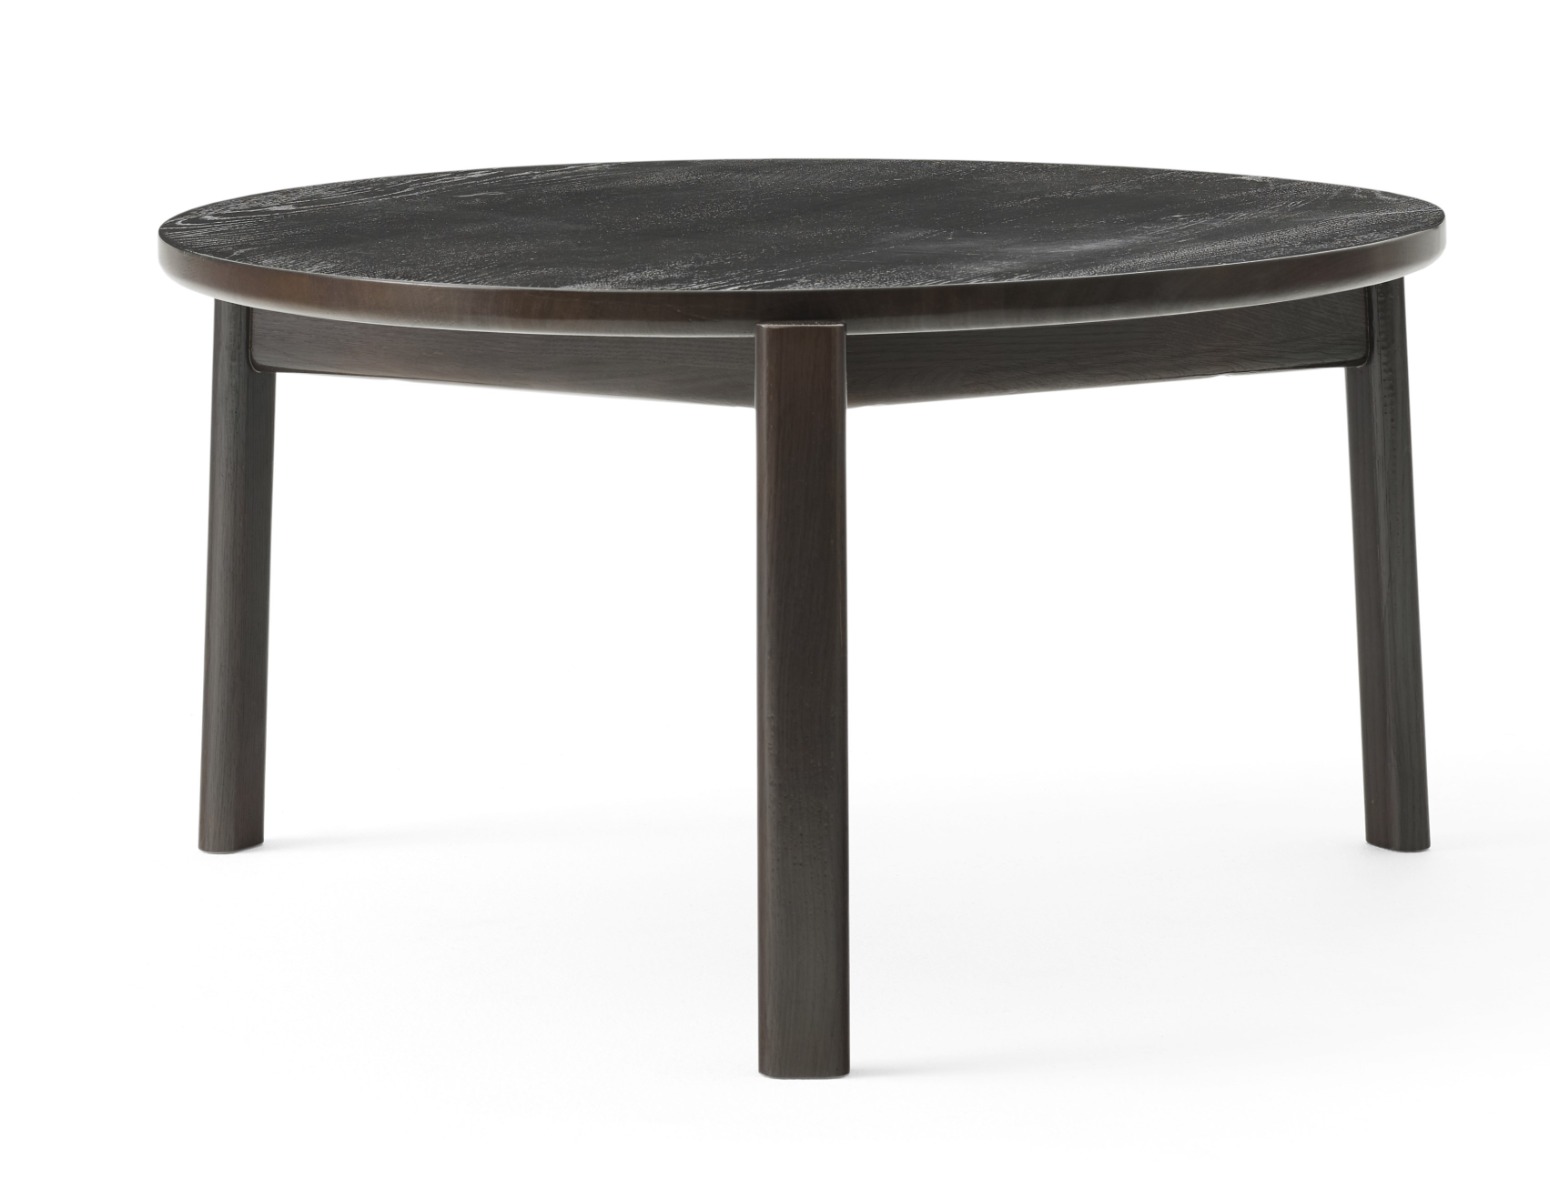 https://www.fundesign.nl/media/catalog/product/9/1/9170959_passage_lounge_table__70_dark_lacquered_oak_front.jpg